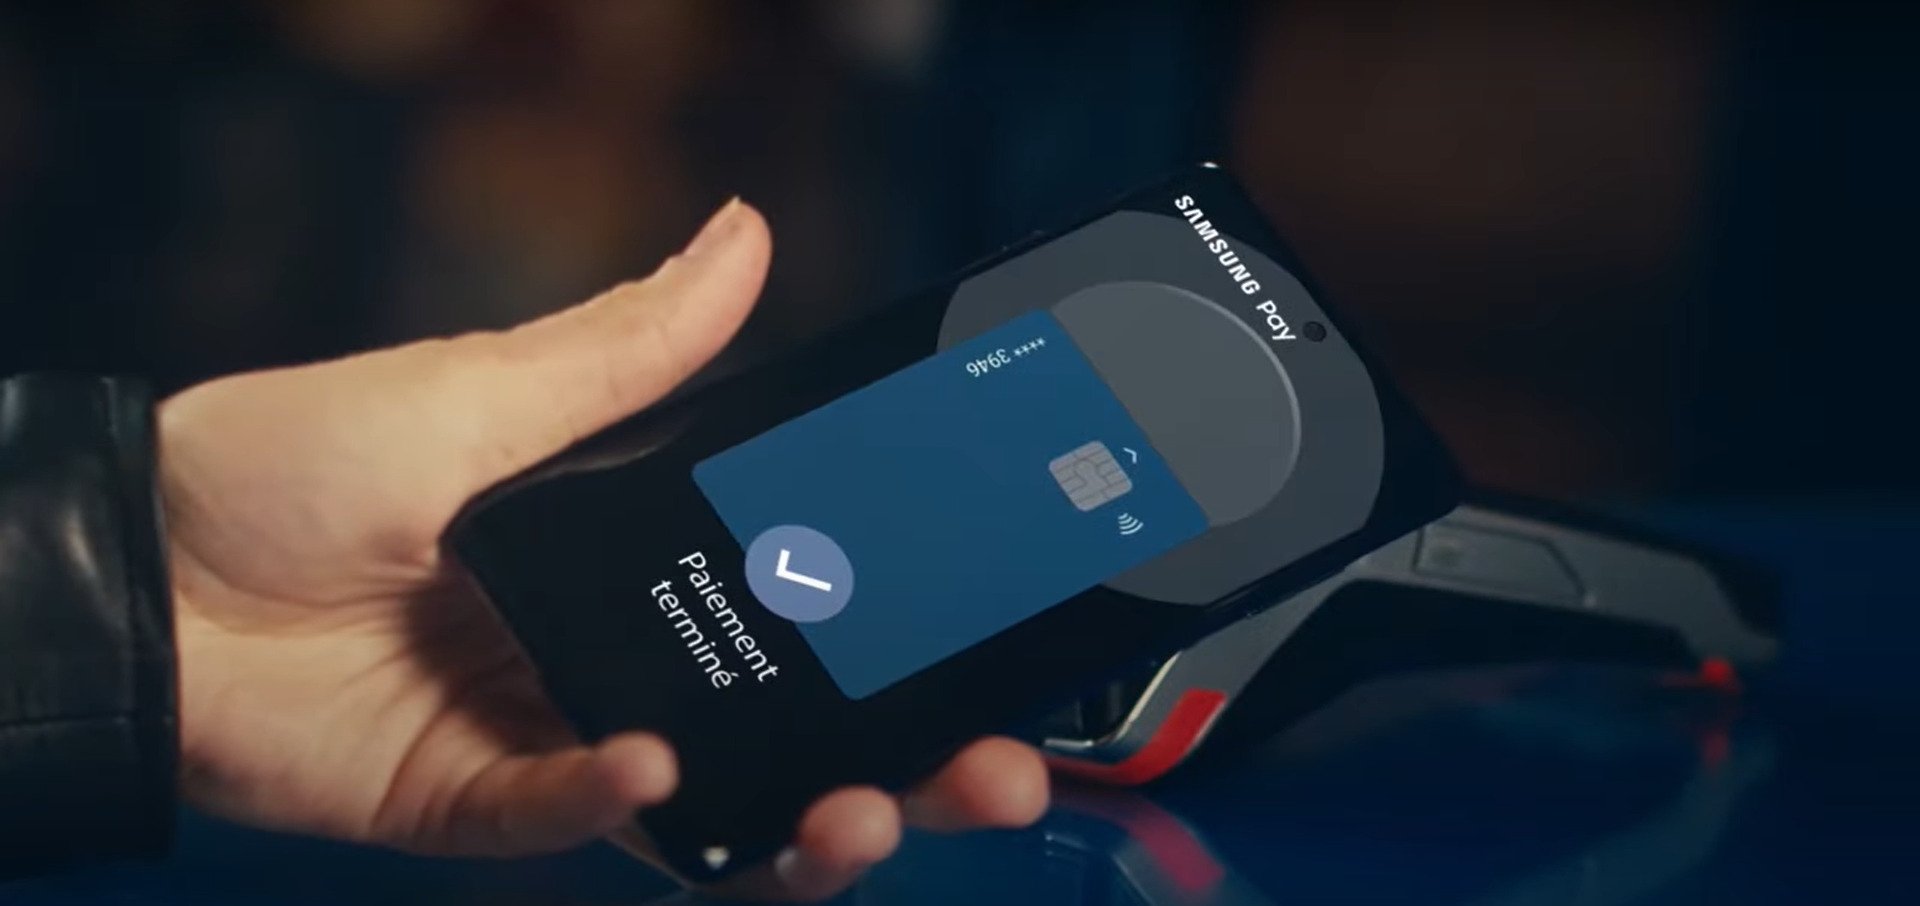 Samsung Pay still works with smartphones from other brands

